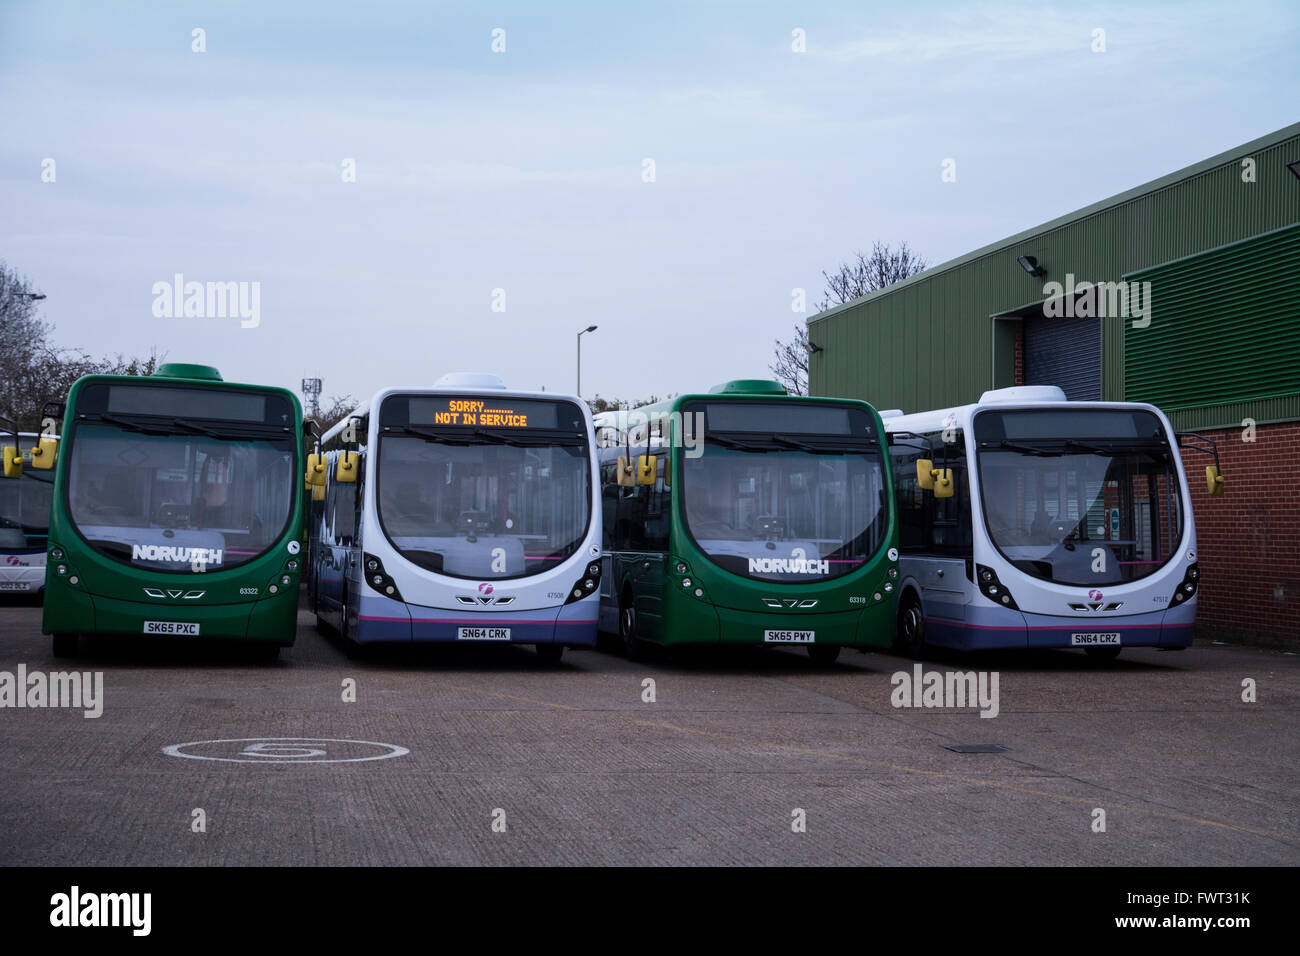 First Bus UK busses Stock Photo